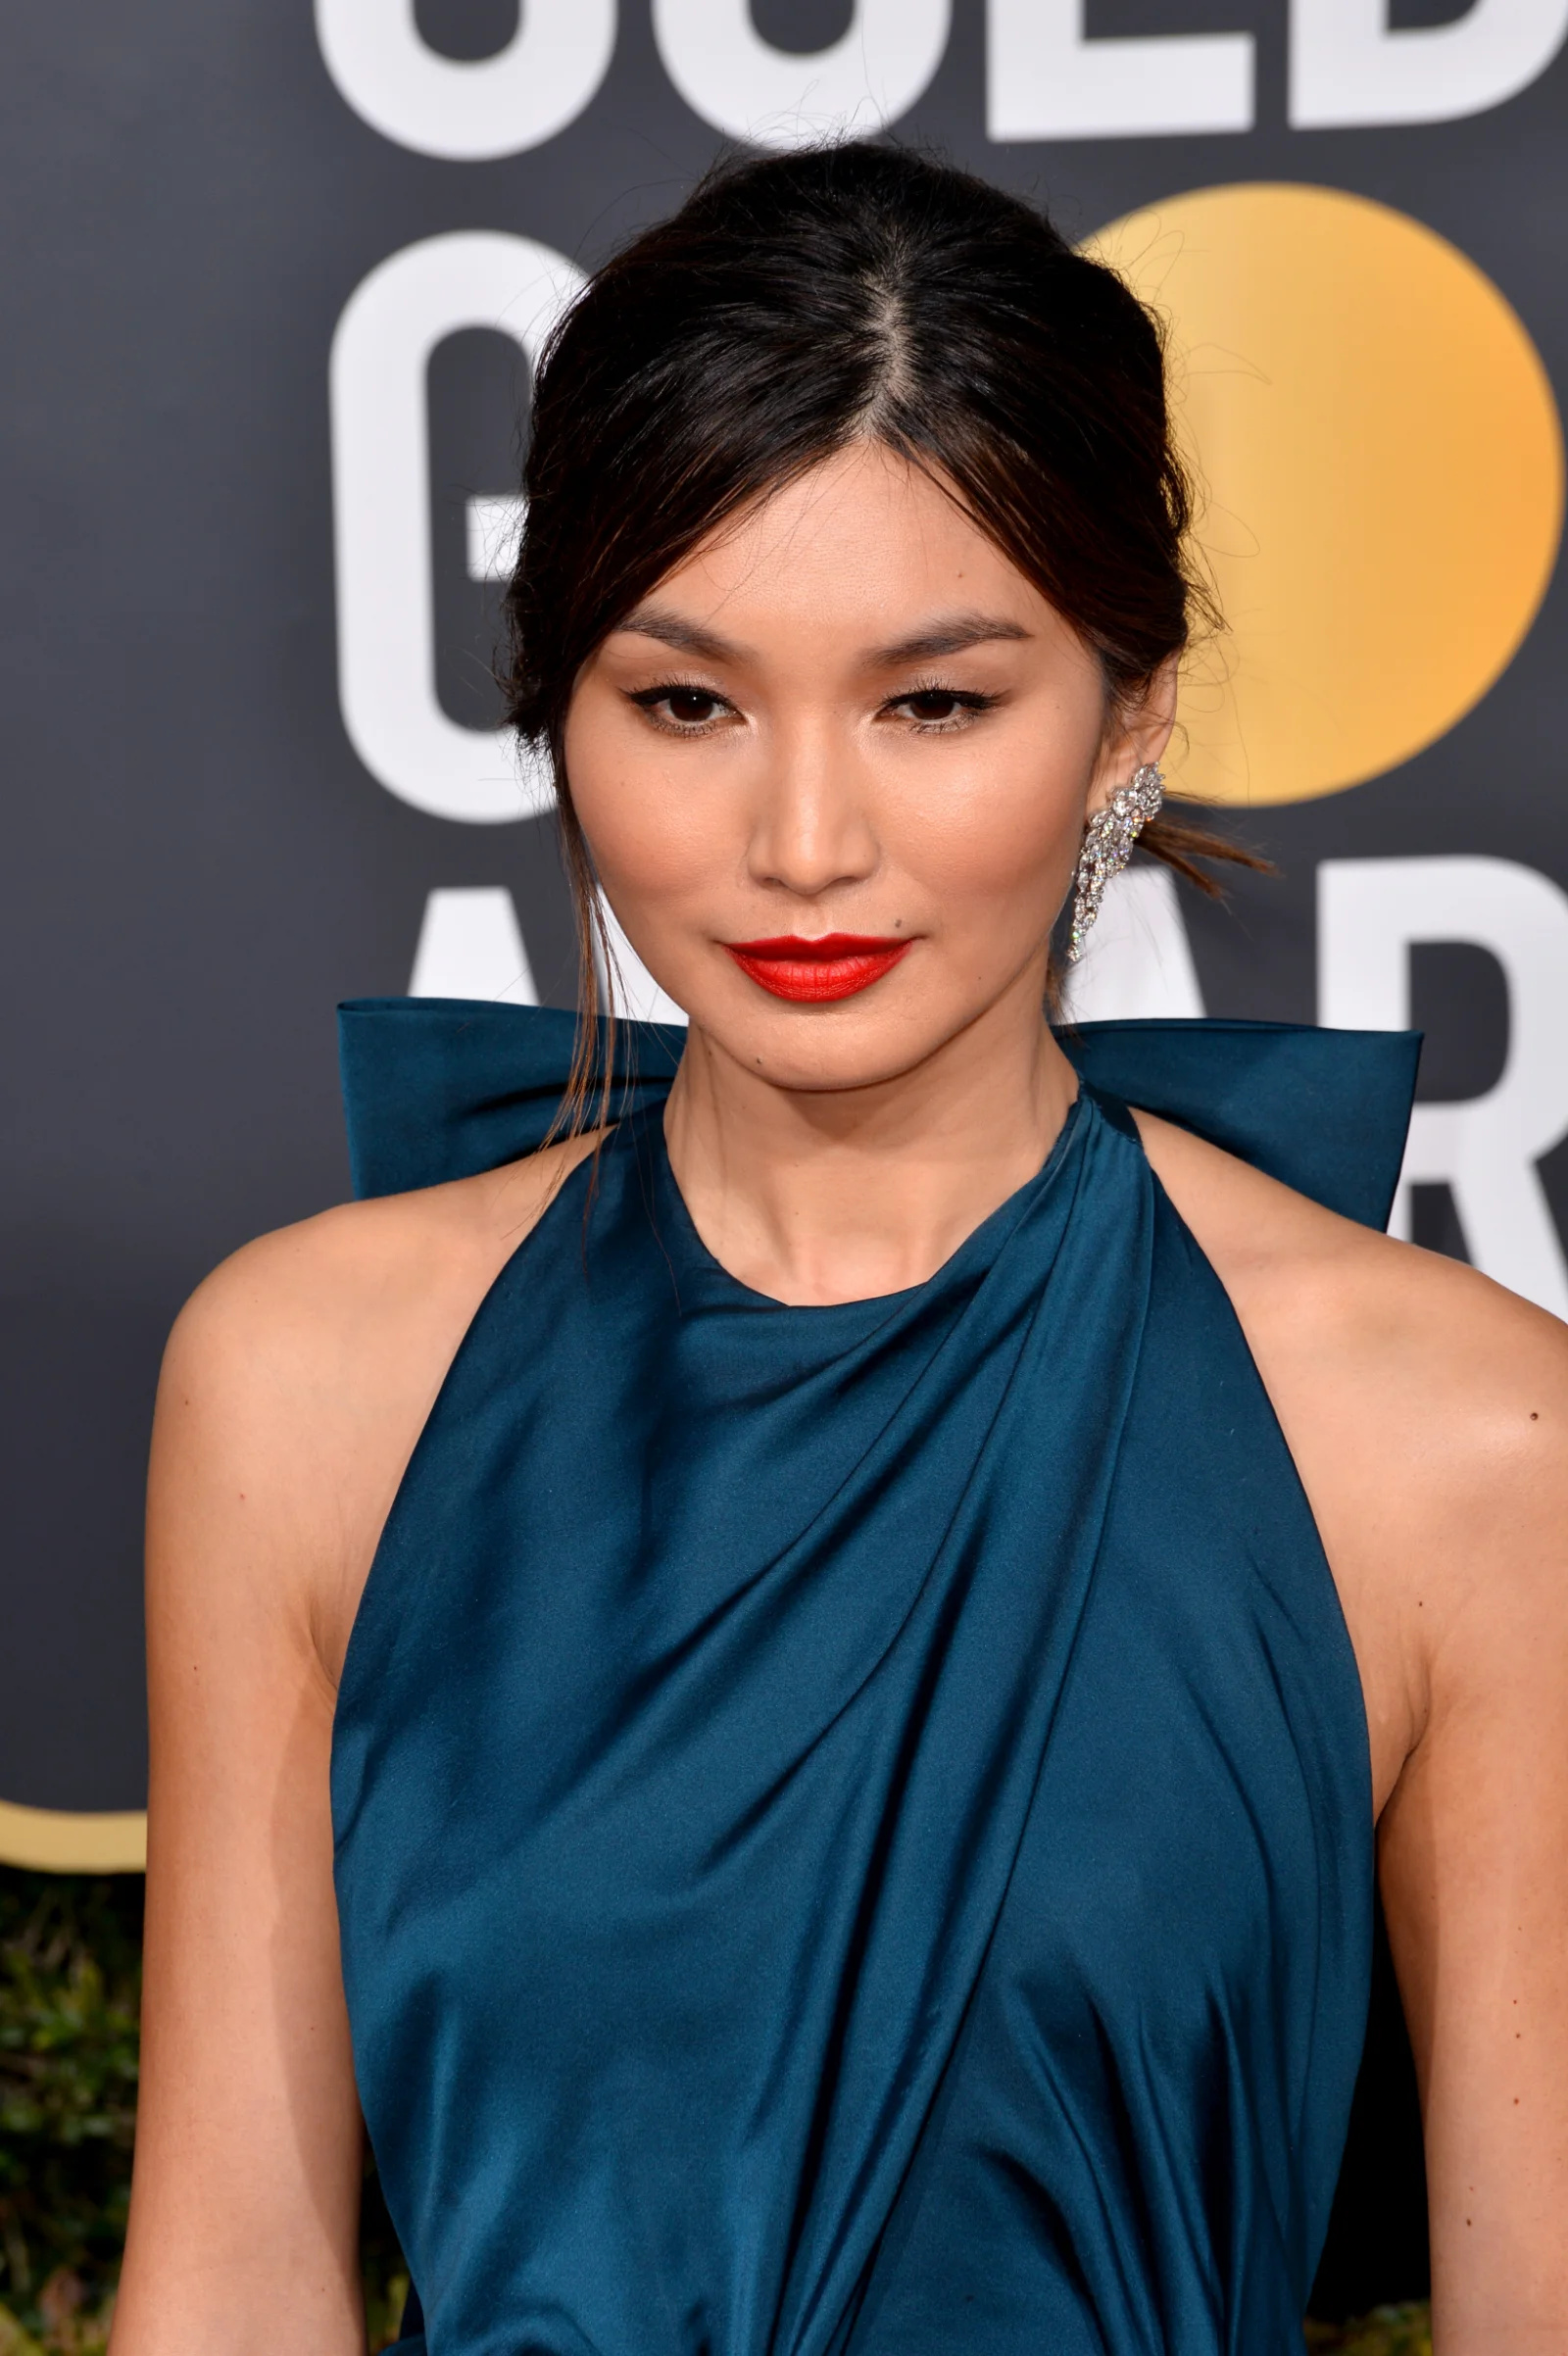 Gemma Chan Wallpapers (34+ images inside)